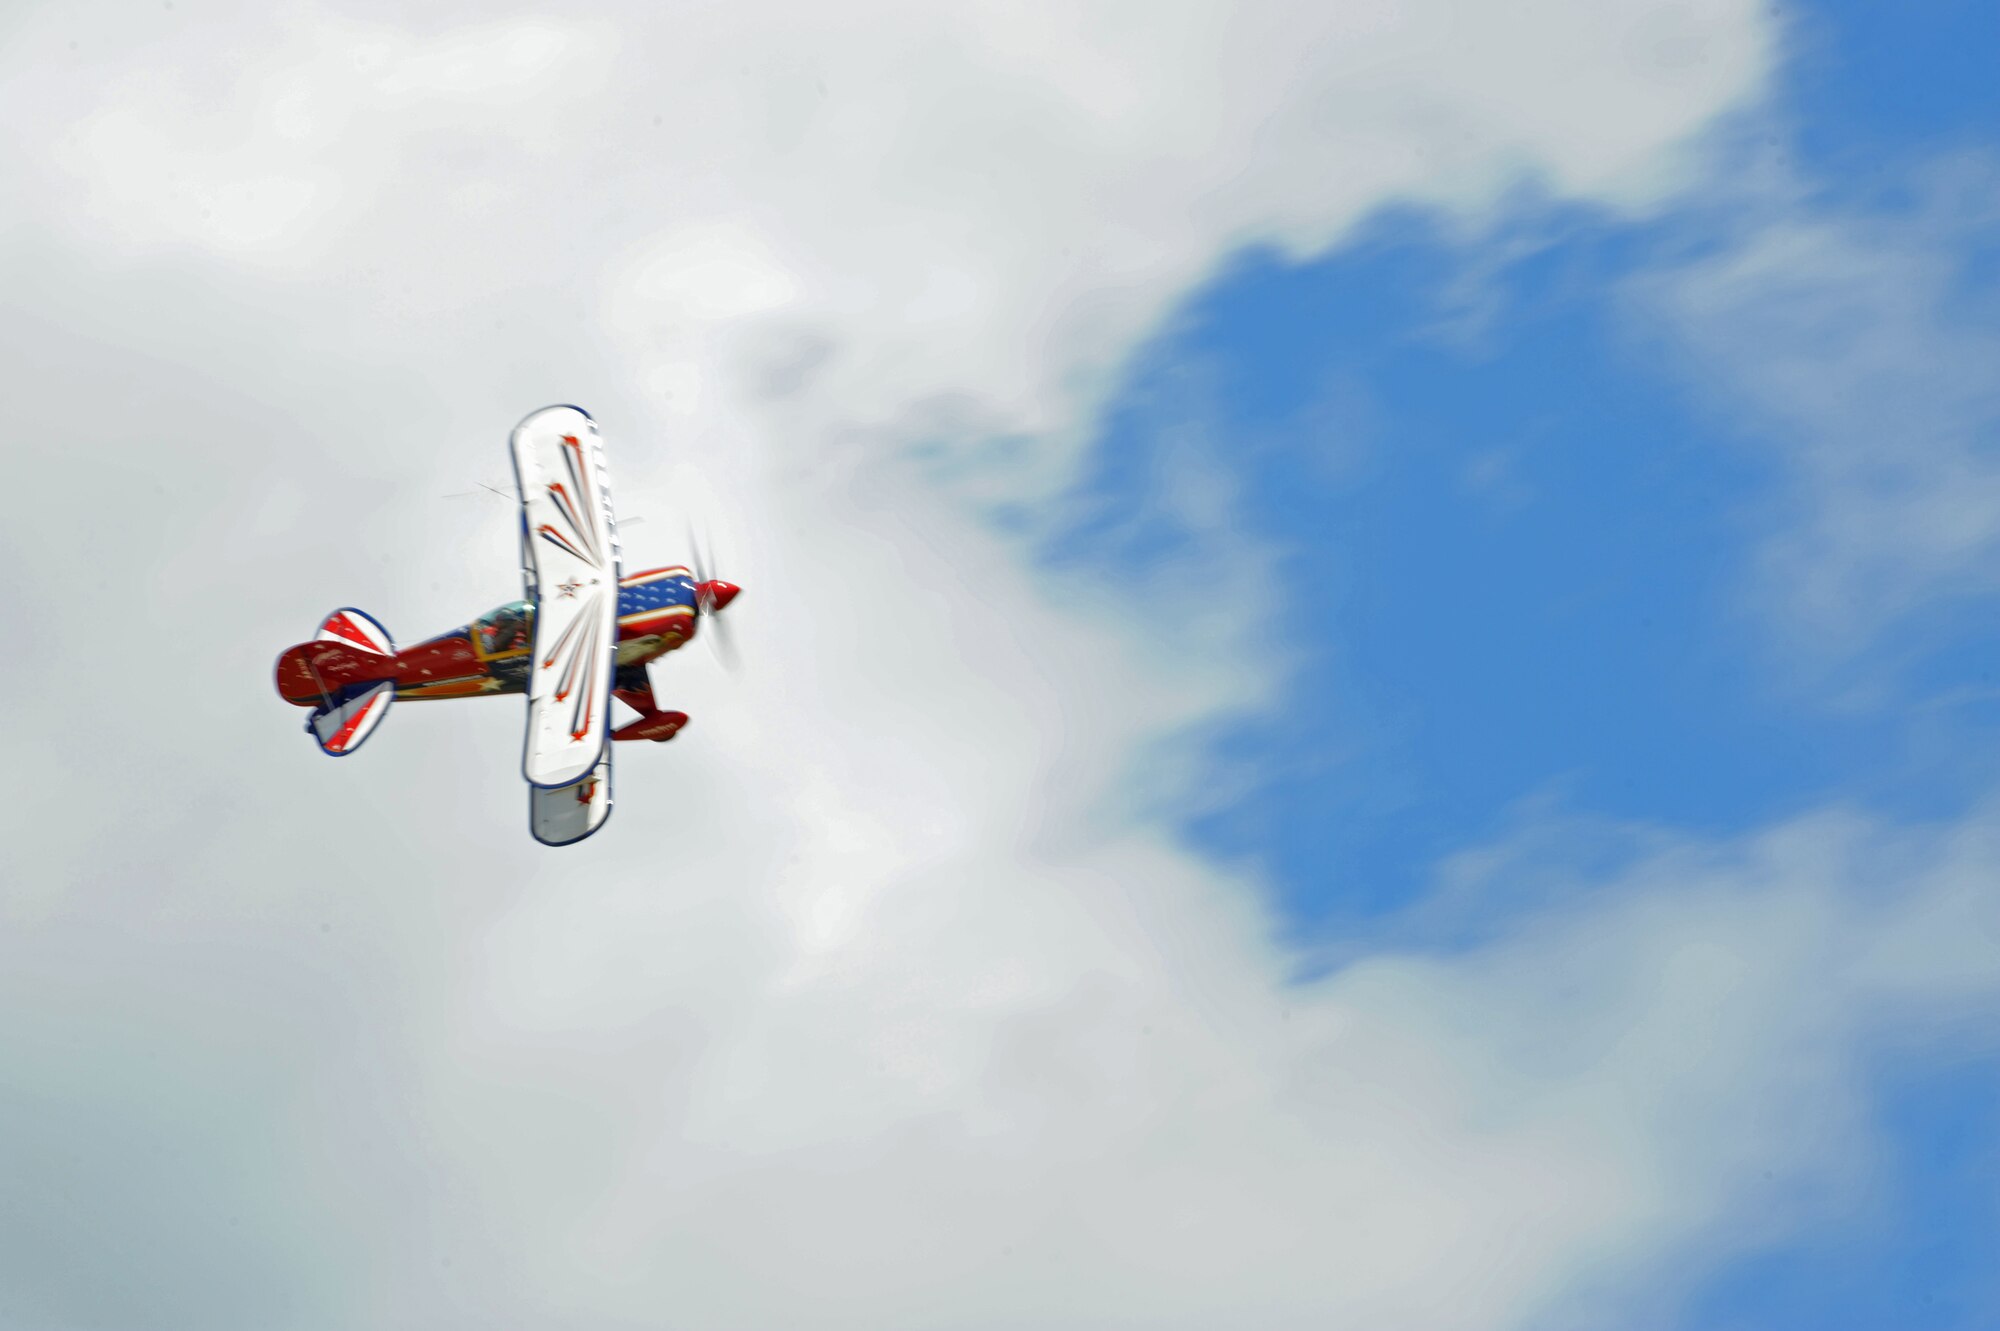 BARKSDALE AIR FORCE BASE, La. -- Jacquie B performs a maneuver during the Barksdale 2010 Defenders of Liberty Air Show here April 25. Her Pitts Special biplane has been acknowledged as the world's leading competition aerobatic and air show display biplane. She has logged more than 1,600 hours of flying in the last 10 years. This is her first time performing at Barksdale. (U.S. Air Force photo by Senior Airman La'Shanette V. Garrett)(Released)